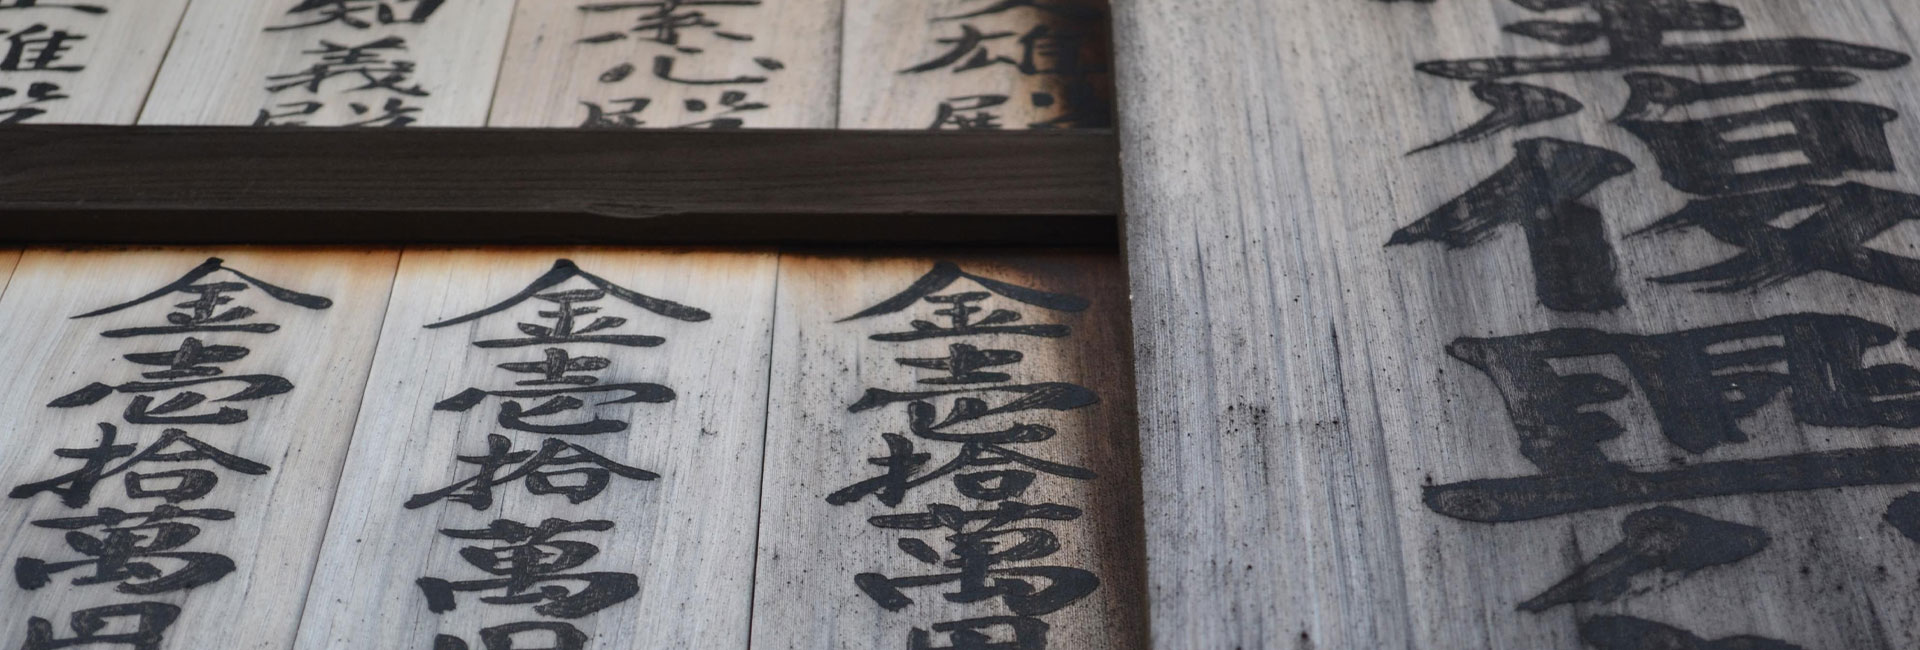 wood-planks-chinese-characters